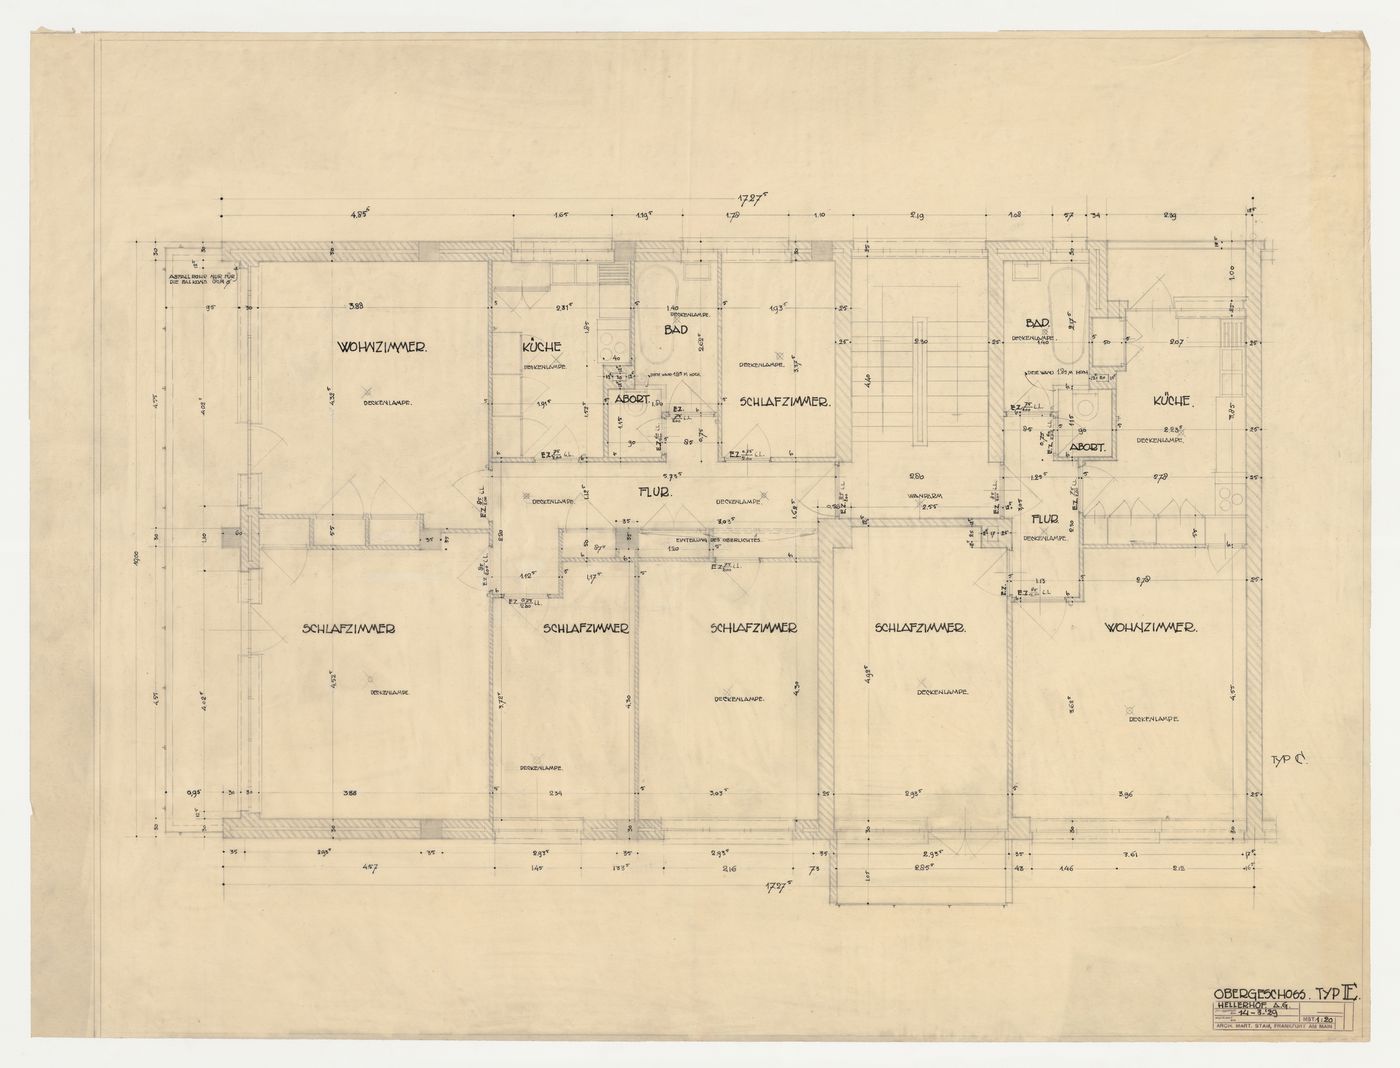 First floor plan for a type E store and housing unit, Hellerhof Housing Estate, Frankfurt am Main, Germany